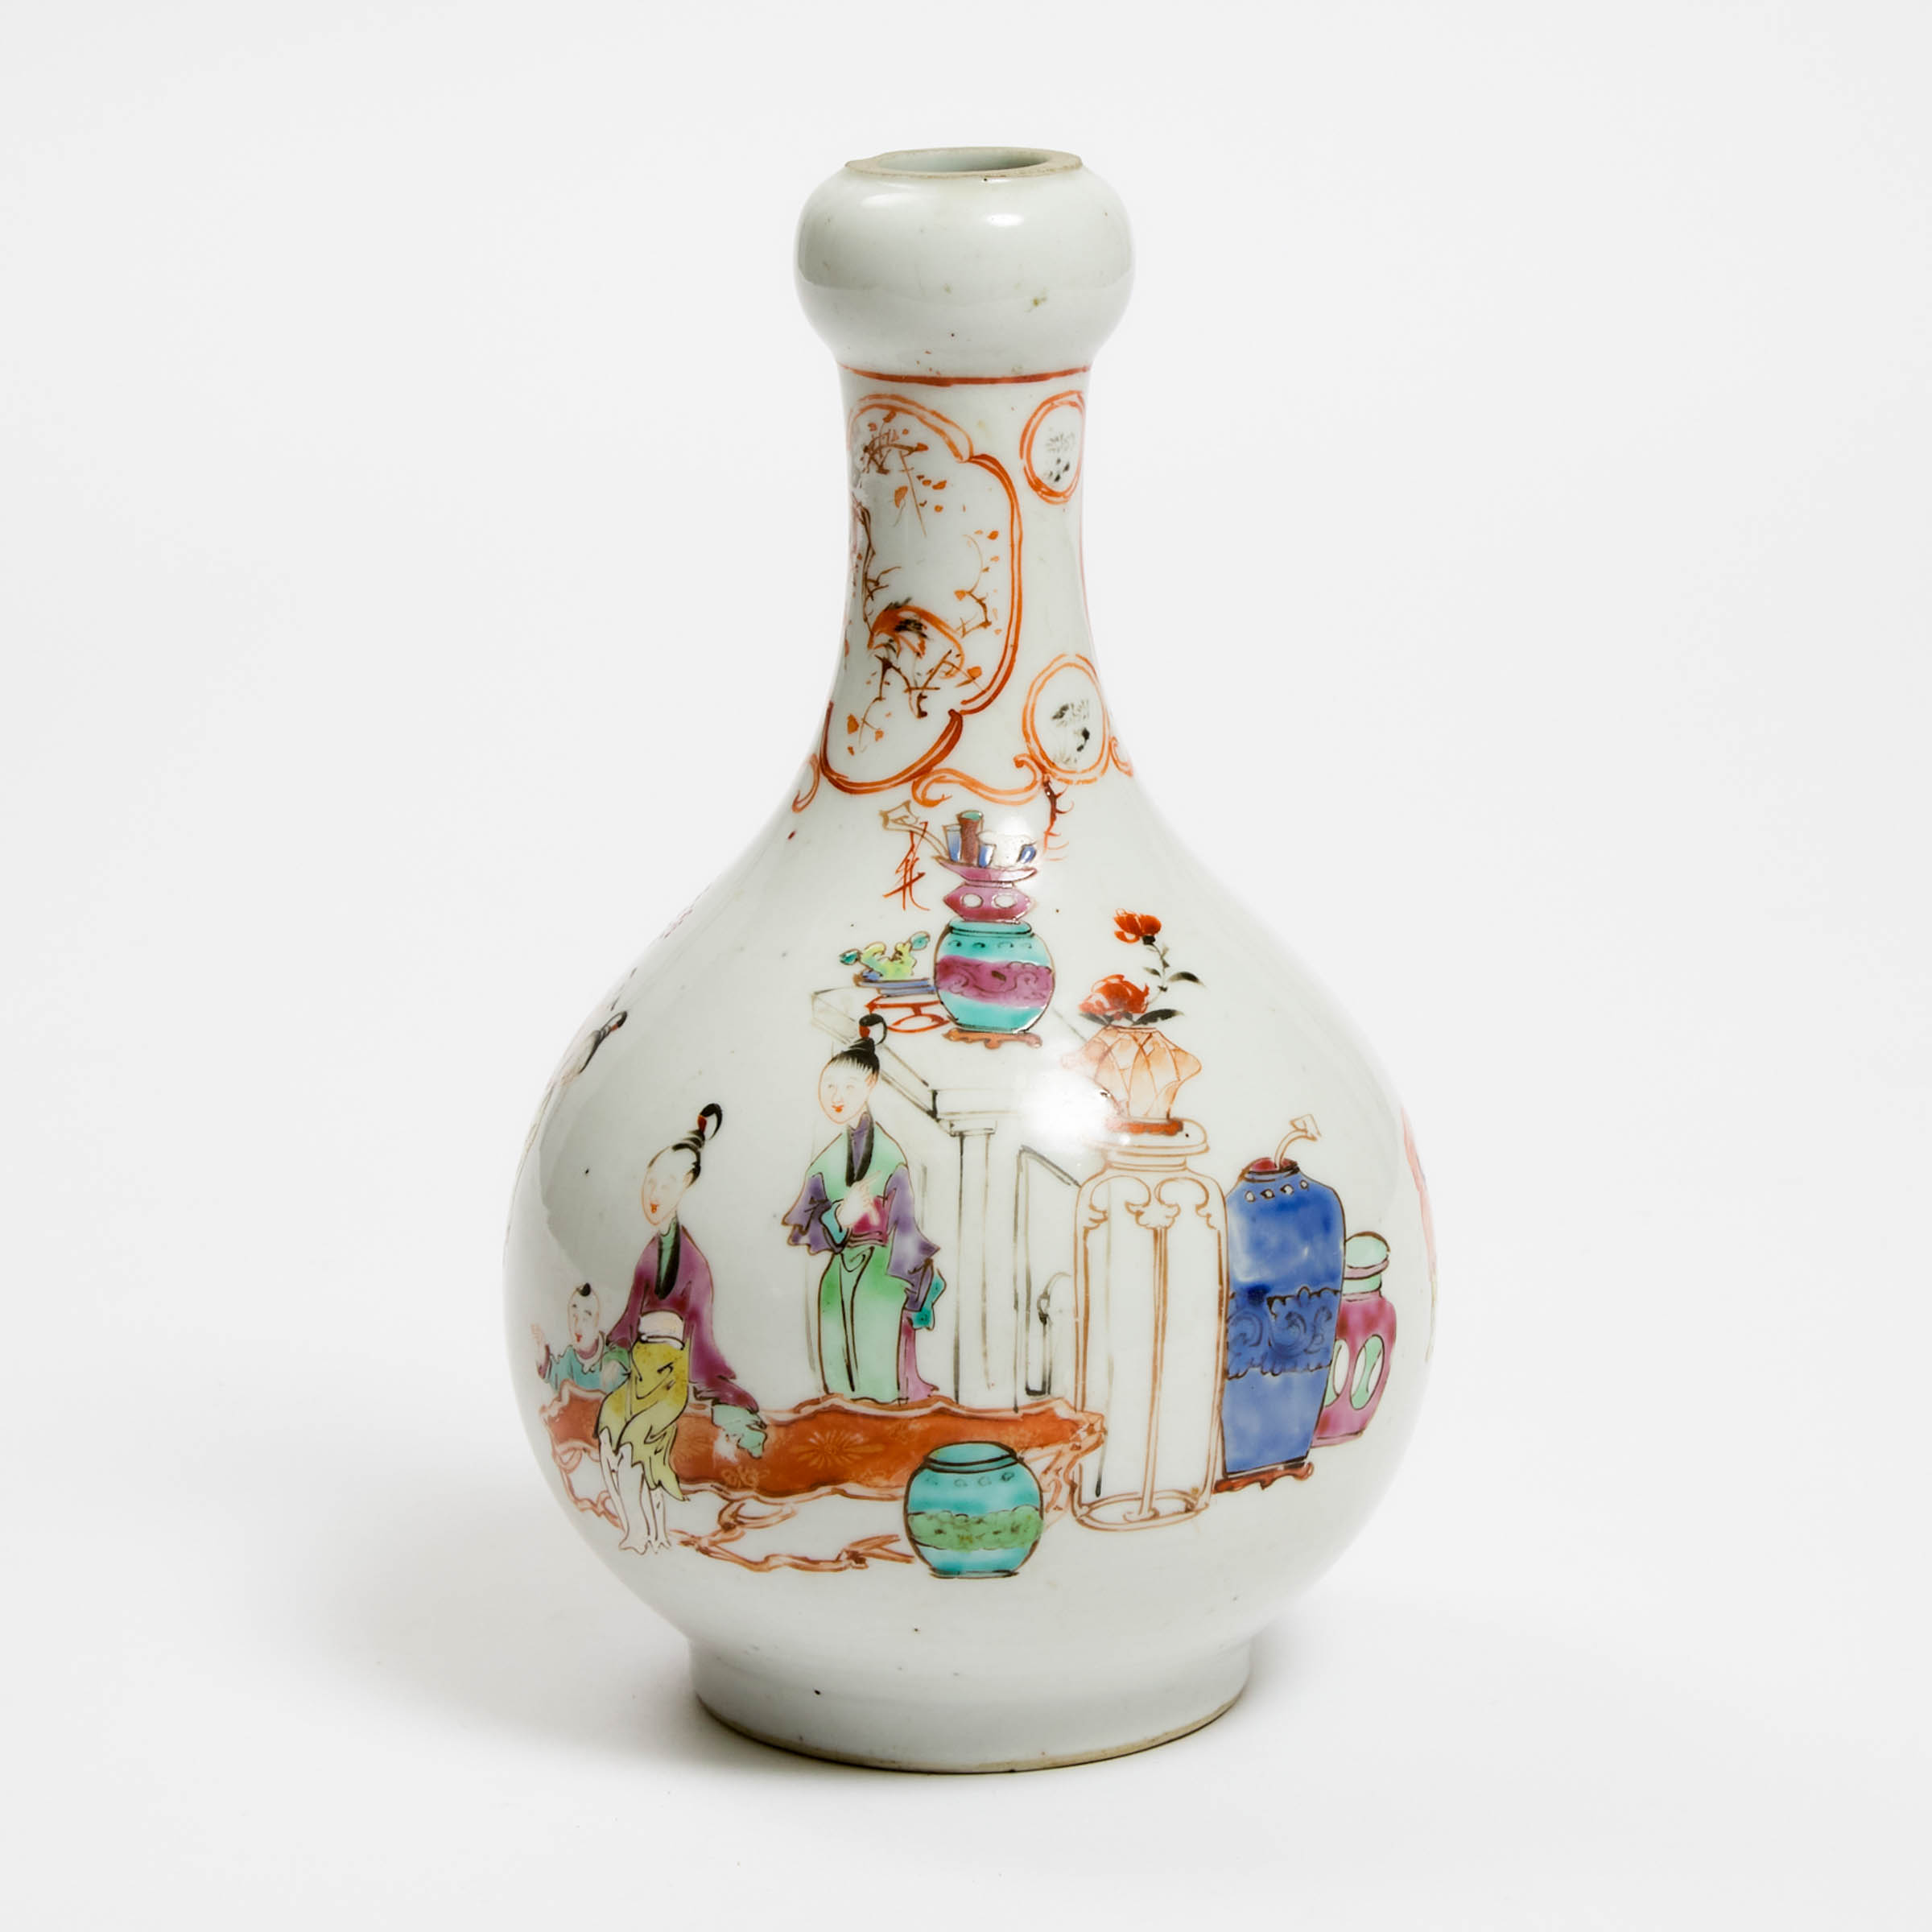 A Chinese Export Famille Rose 'Figural' Garlic-Mouth Vase, Qianlong Period (1736-1795)